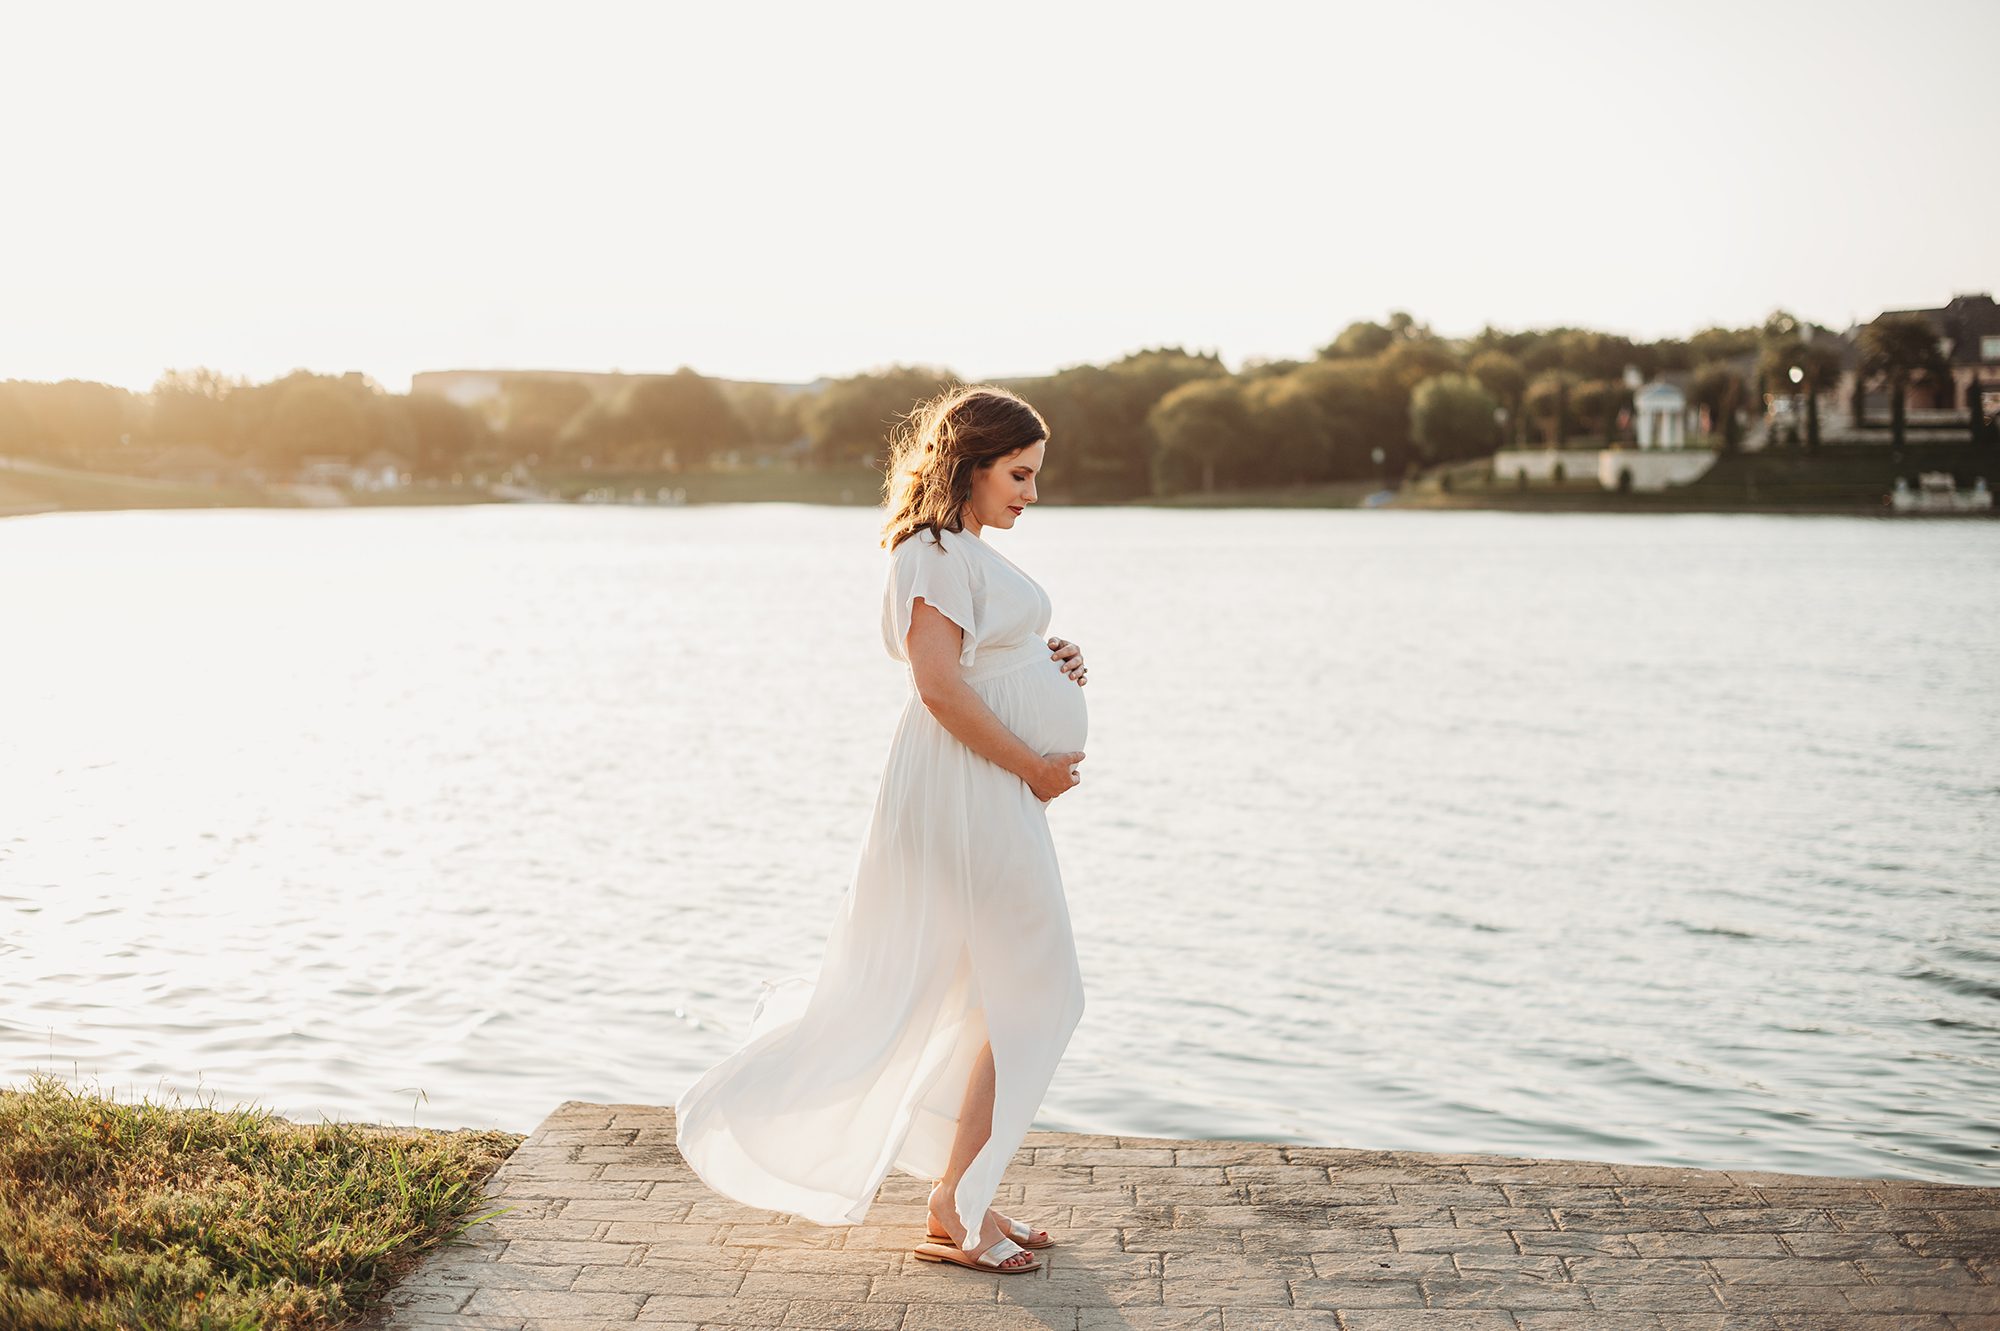 Pregnant woman standing lakeside holding her belly in a Dallas maternity photography session by Splendor Photography